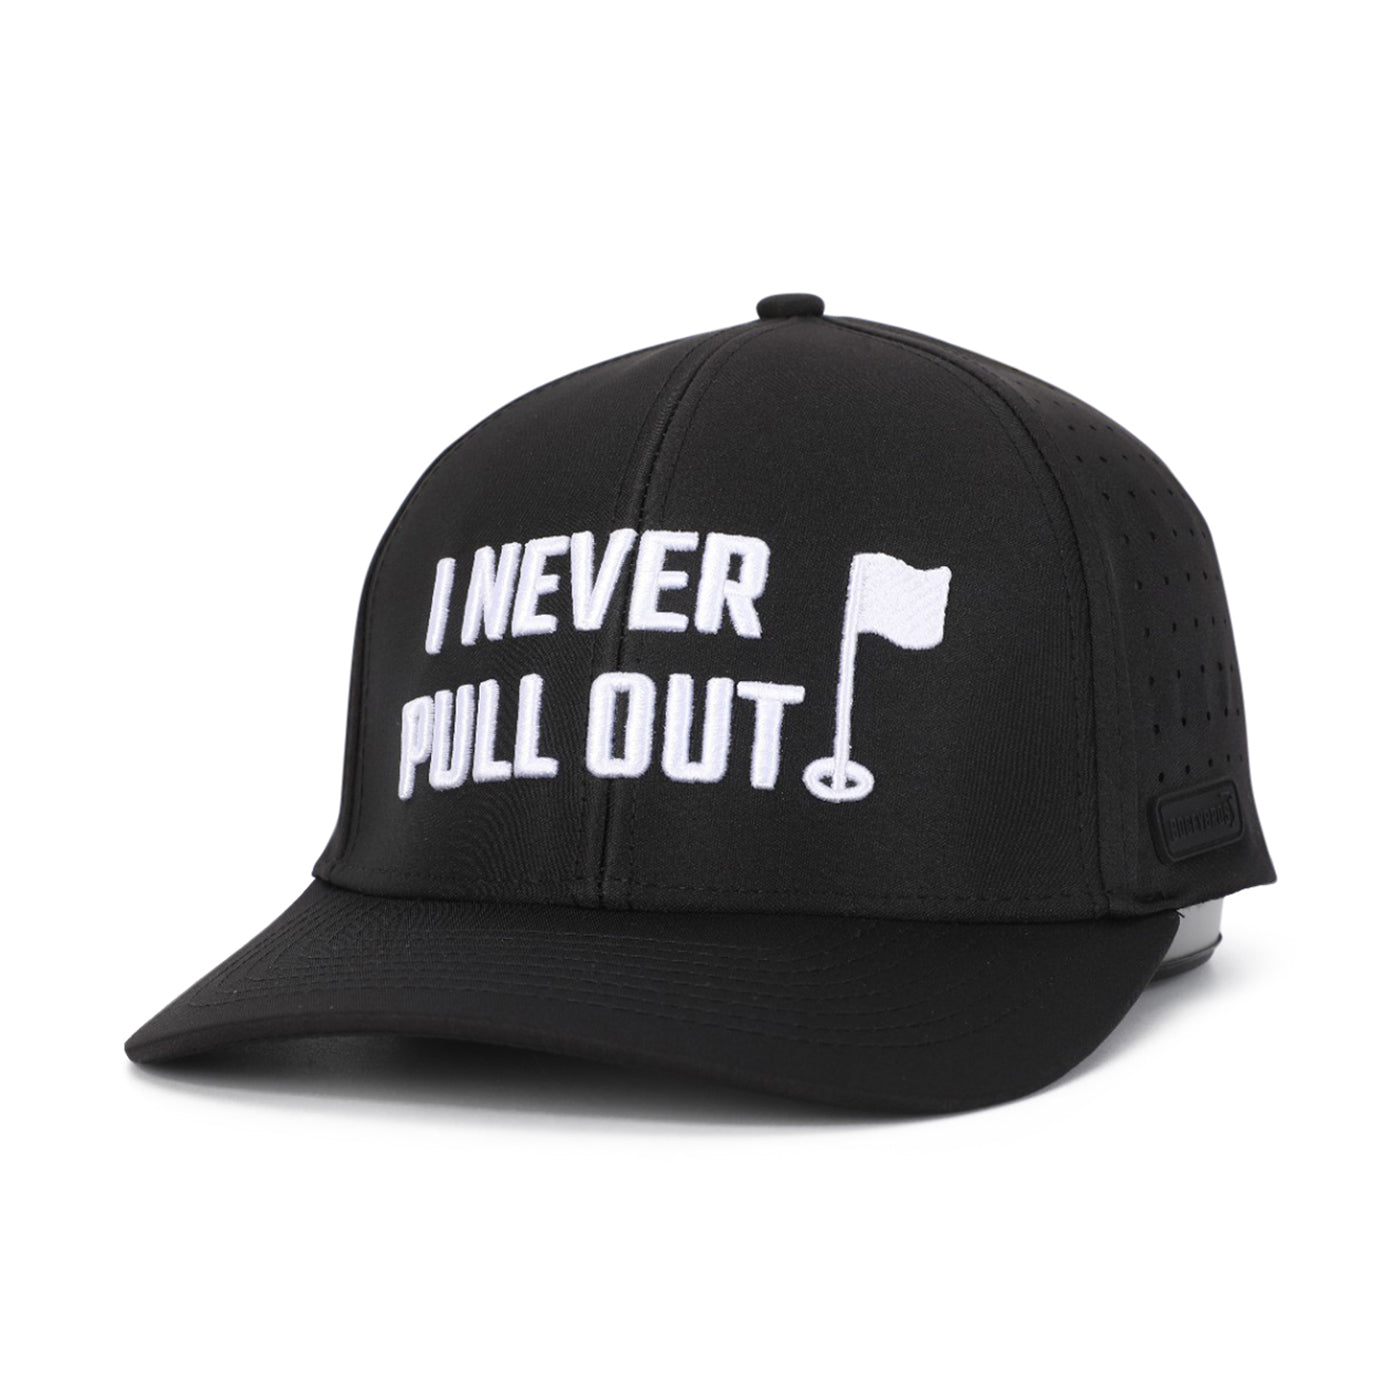 I Never Pull Out - Performance Golf Hat - Stretch Fit